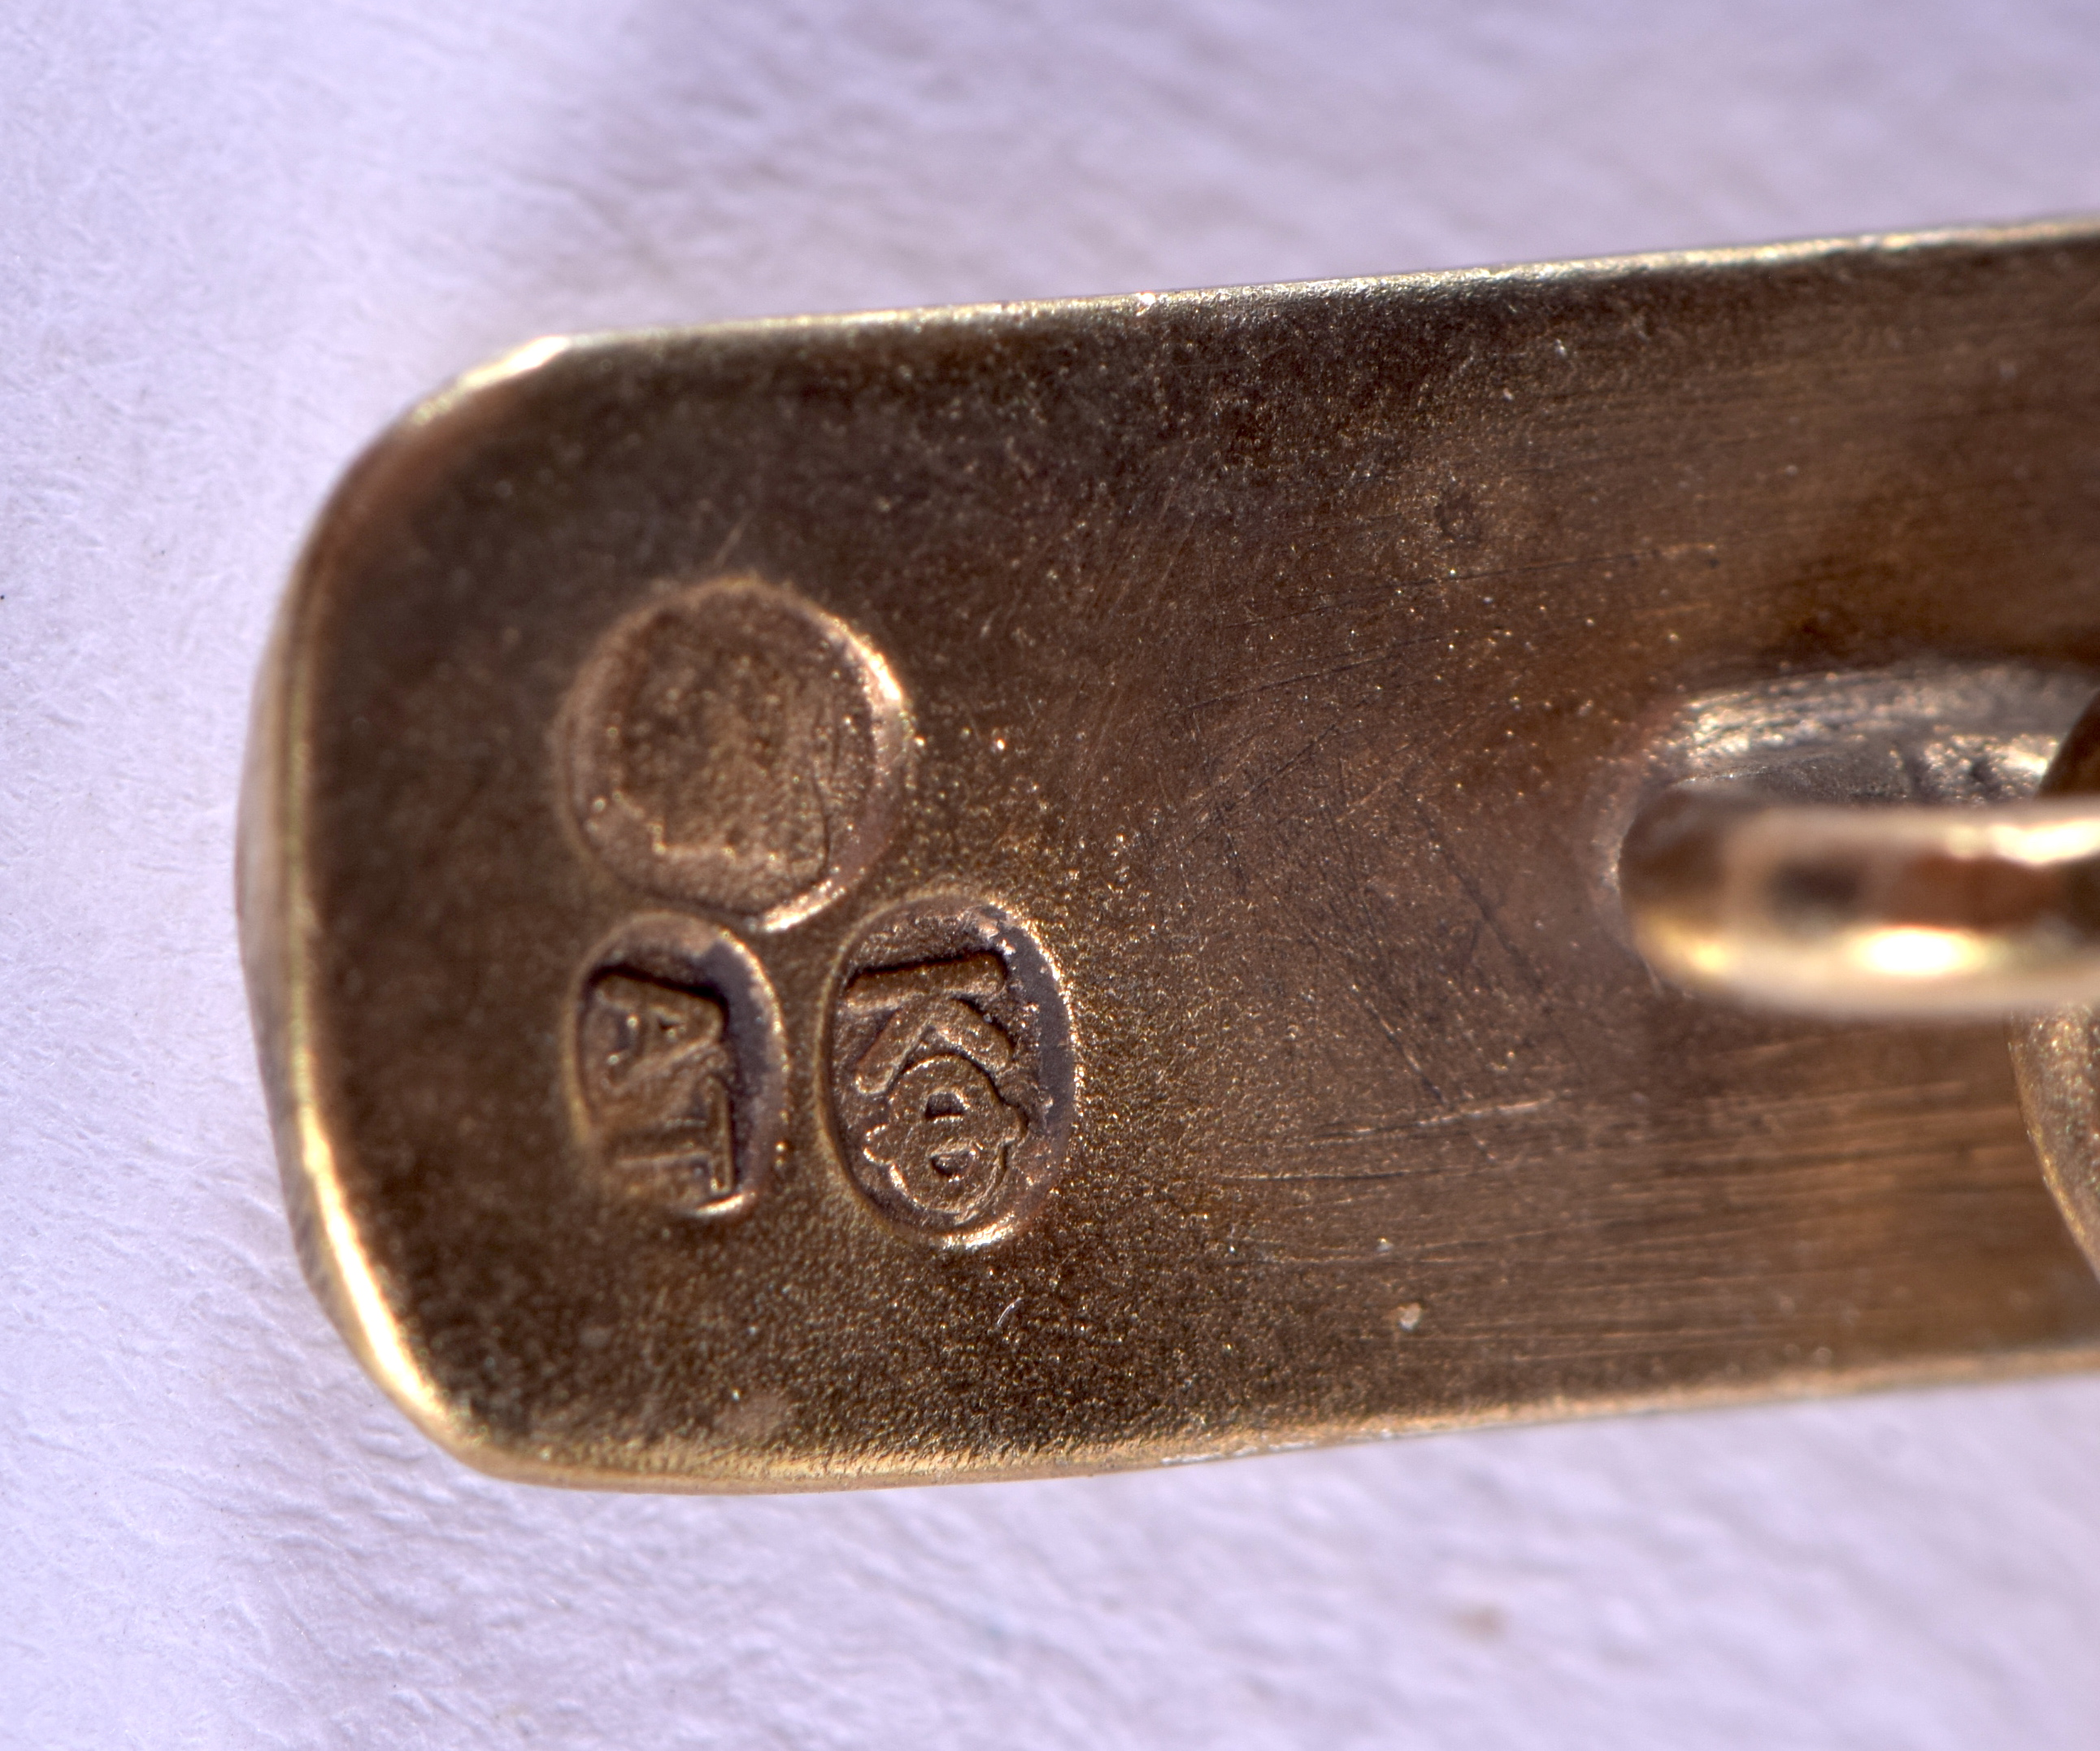 A PAIR OF CONTINENTAL JEWELLED SILVER GILT CUFFLINKS. 21 grams. - Image 4 of 4